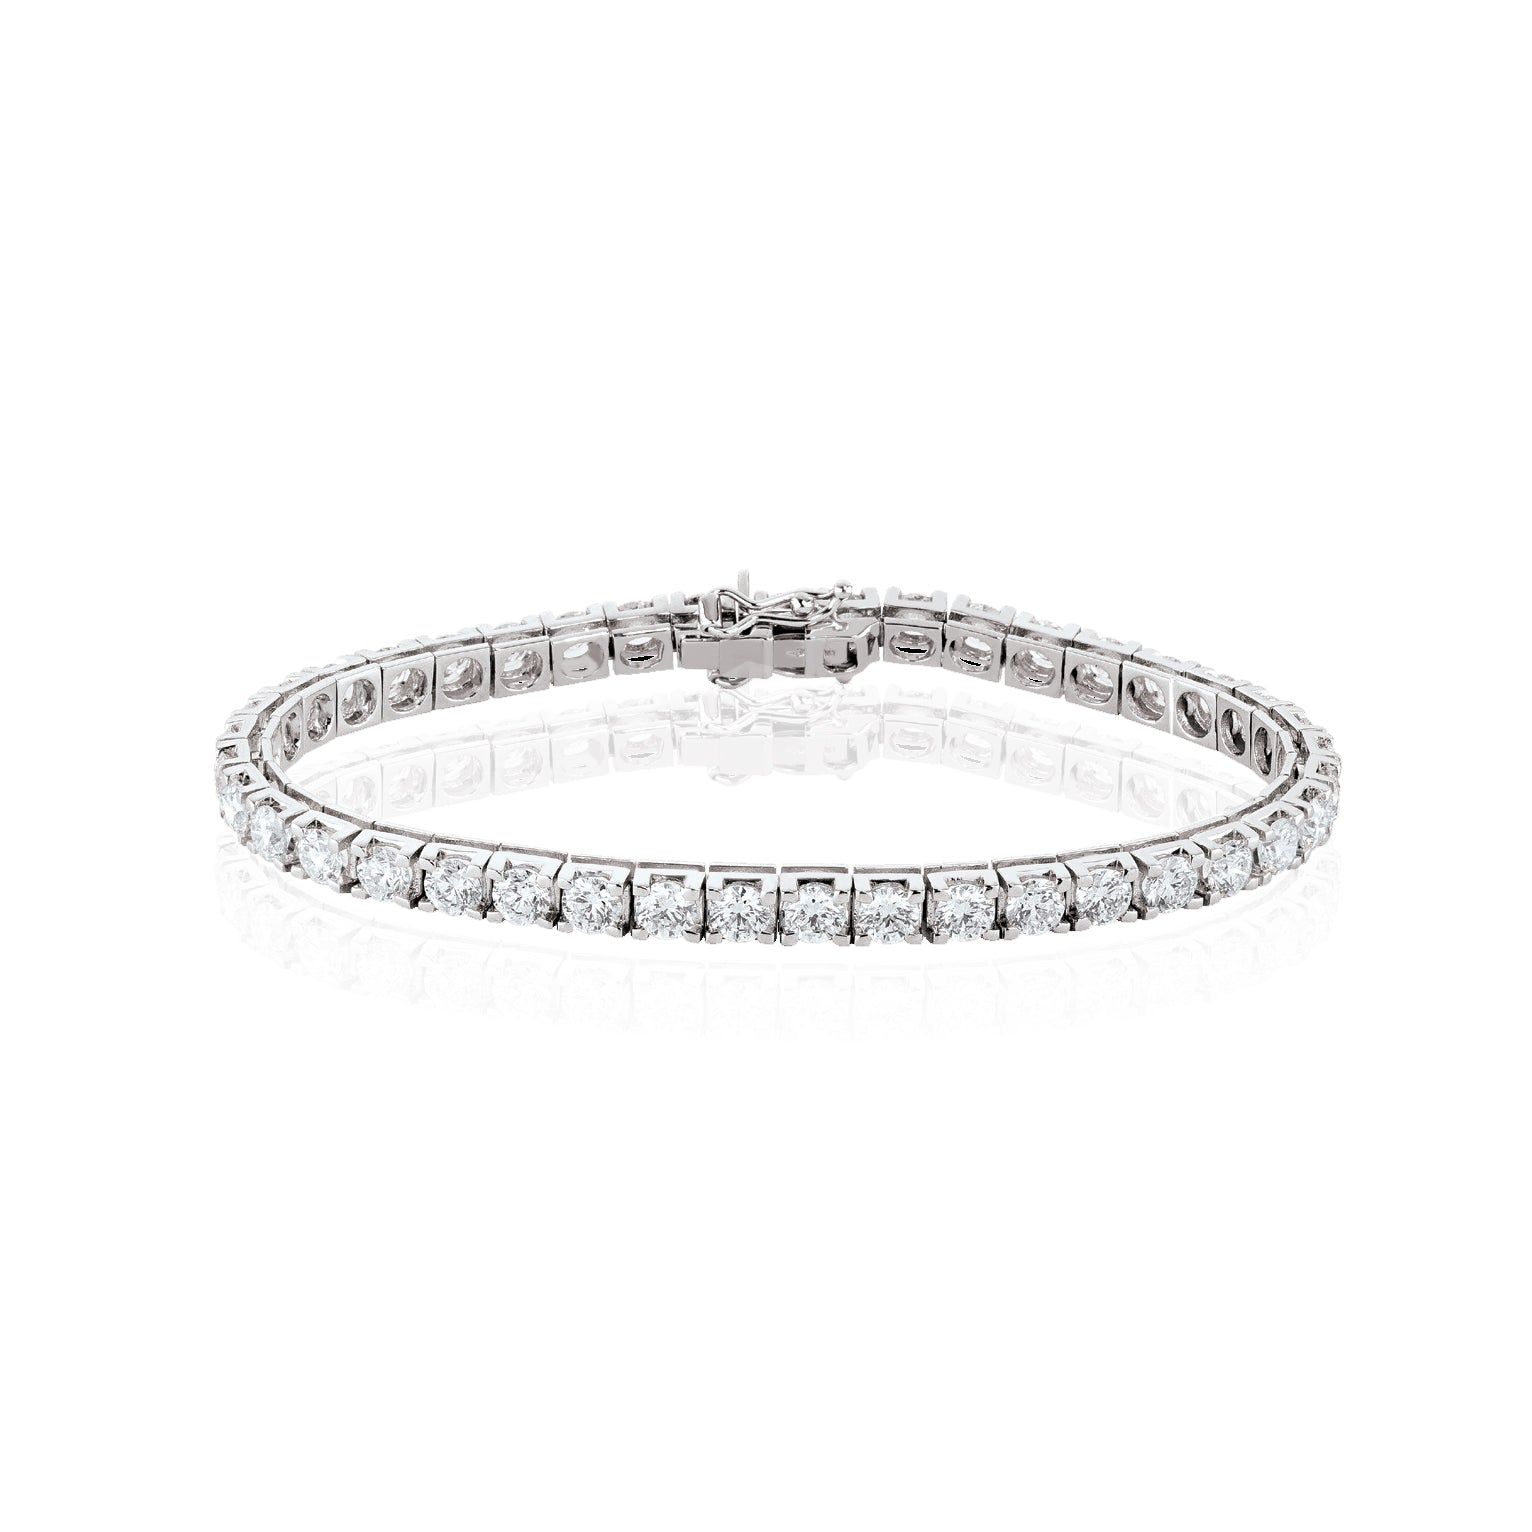 Buy 2 Ct Diamond Tennis Bracelet, 14K Solid Yellow Gold, Natural Real  Stones, Elegant Gift for Woman, Fine Jewelry, 7 Inches Bracelet Online in  India - Etsy